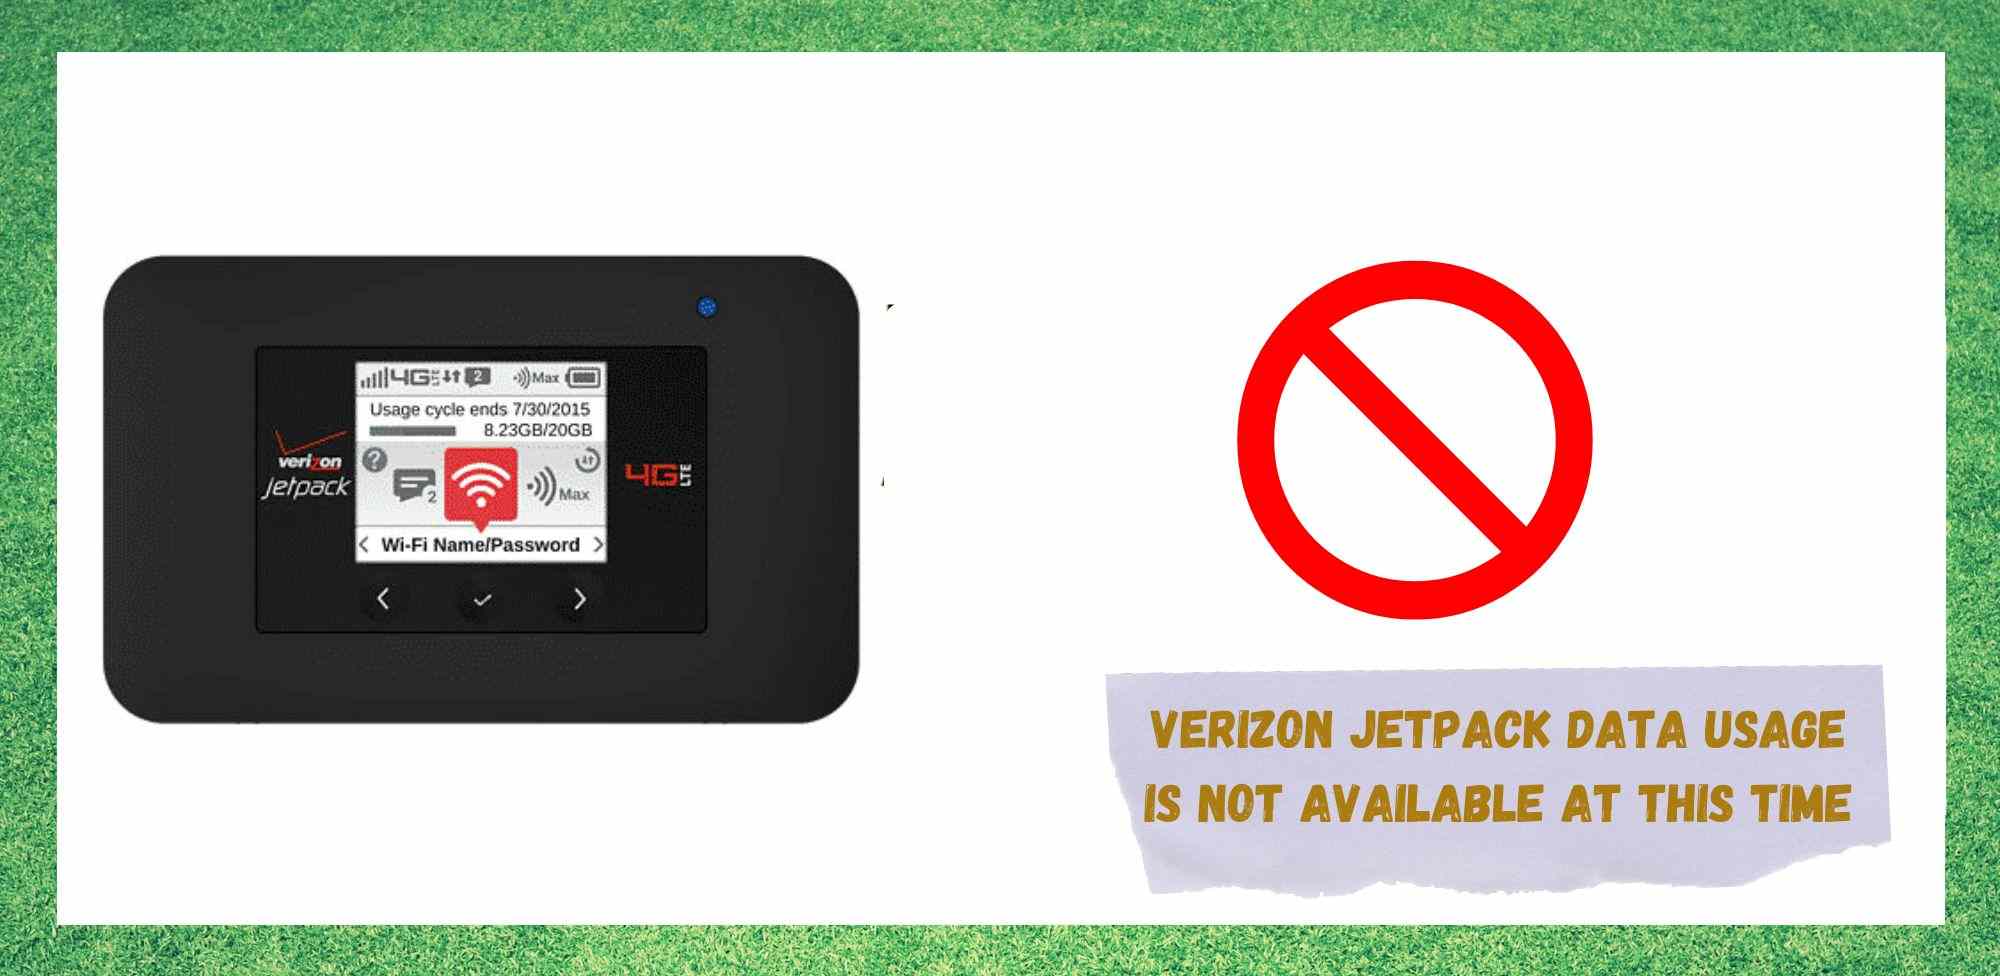 verizon jetpack data usage is not available at this time